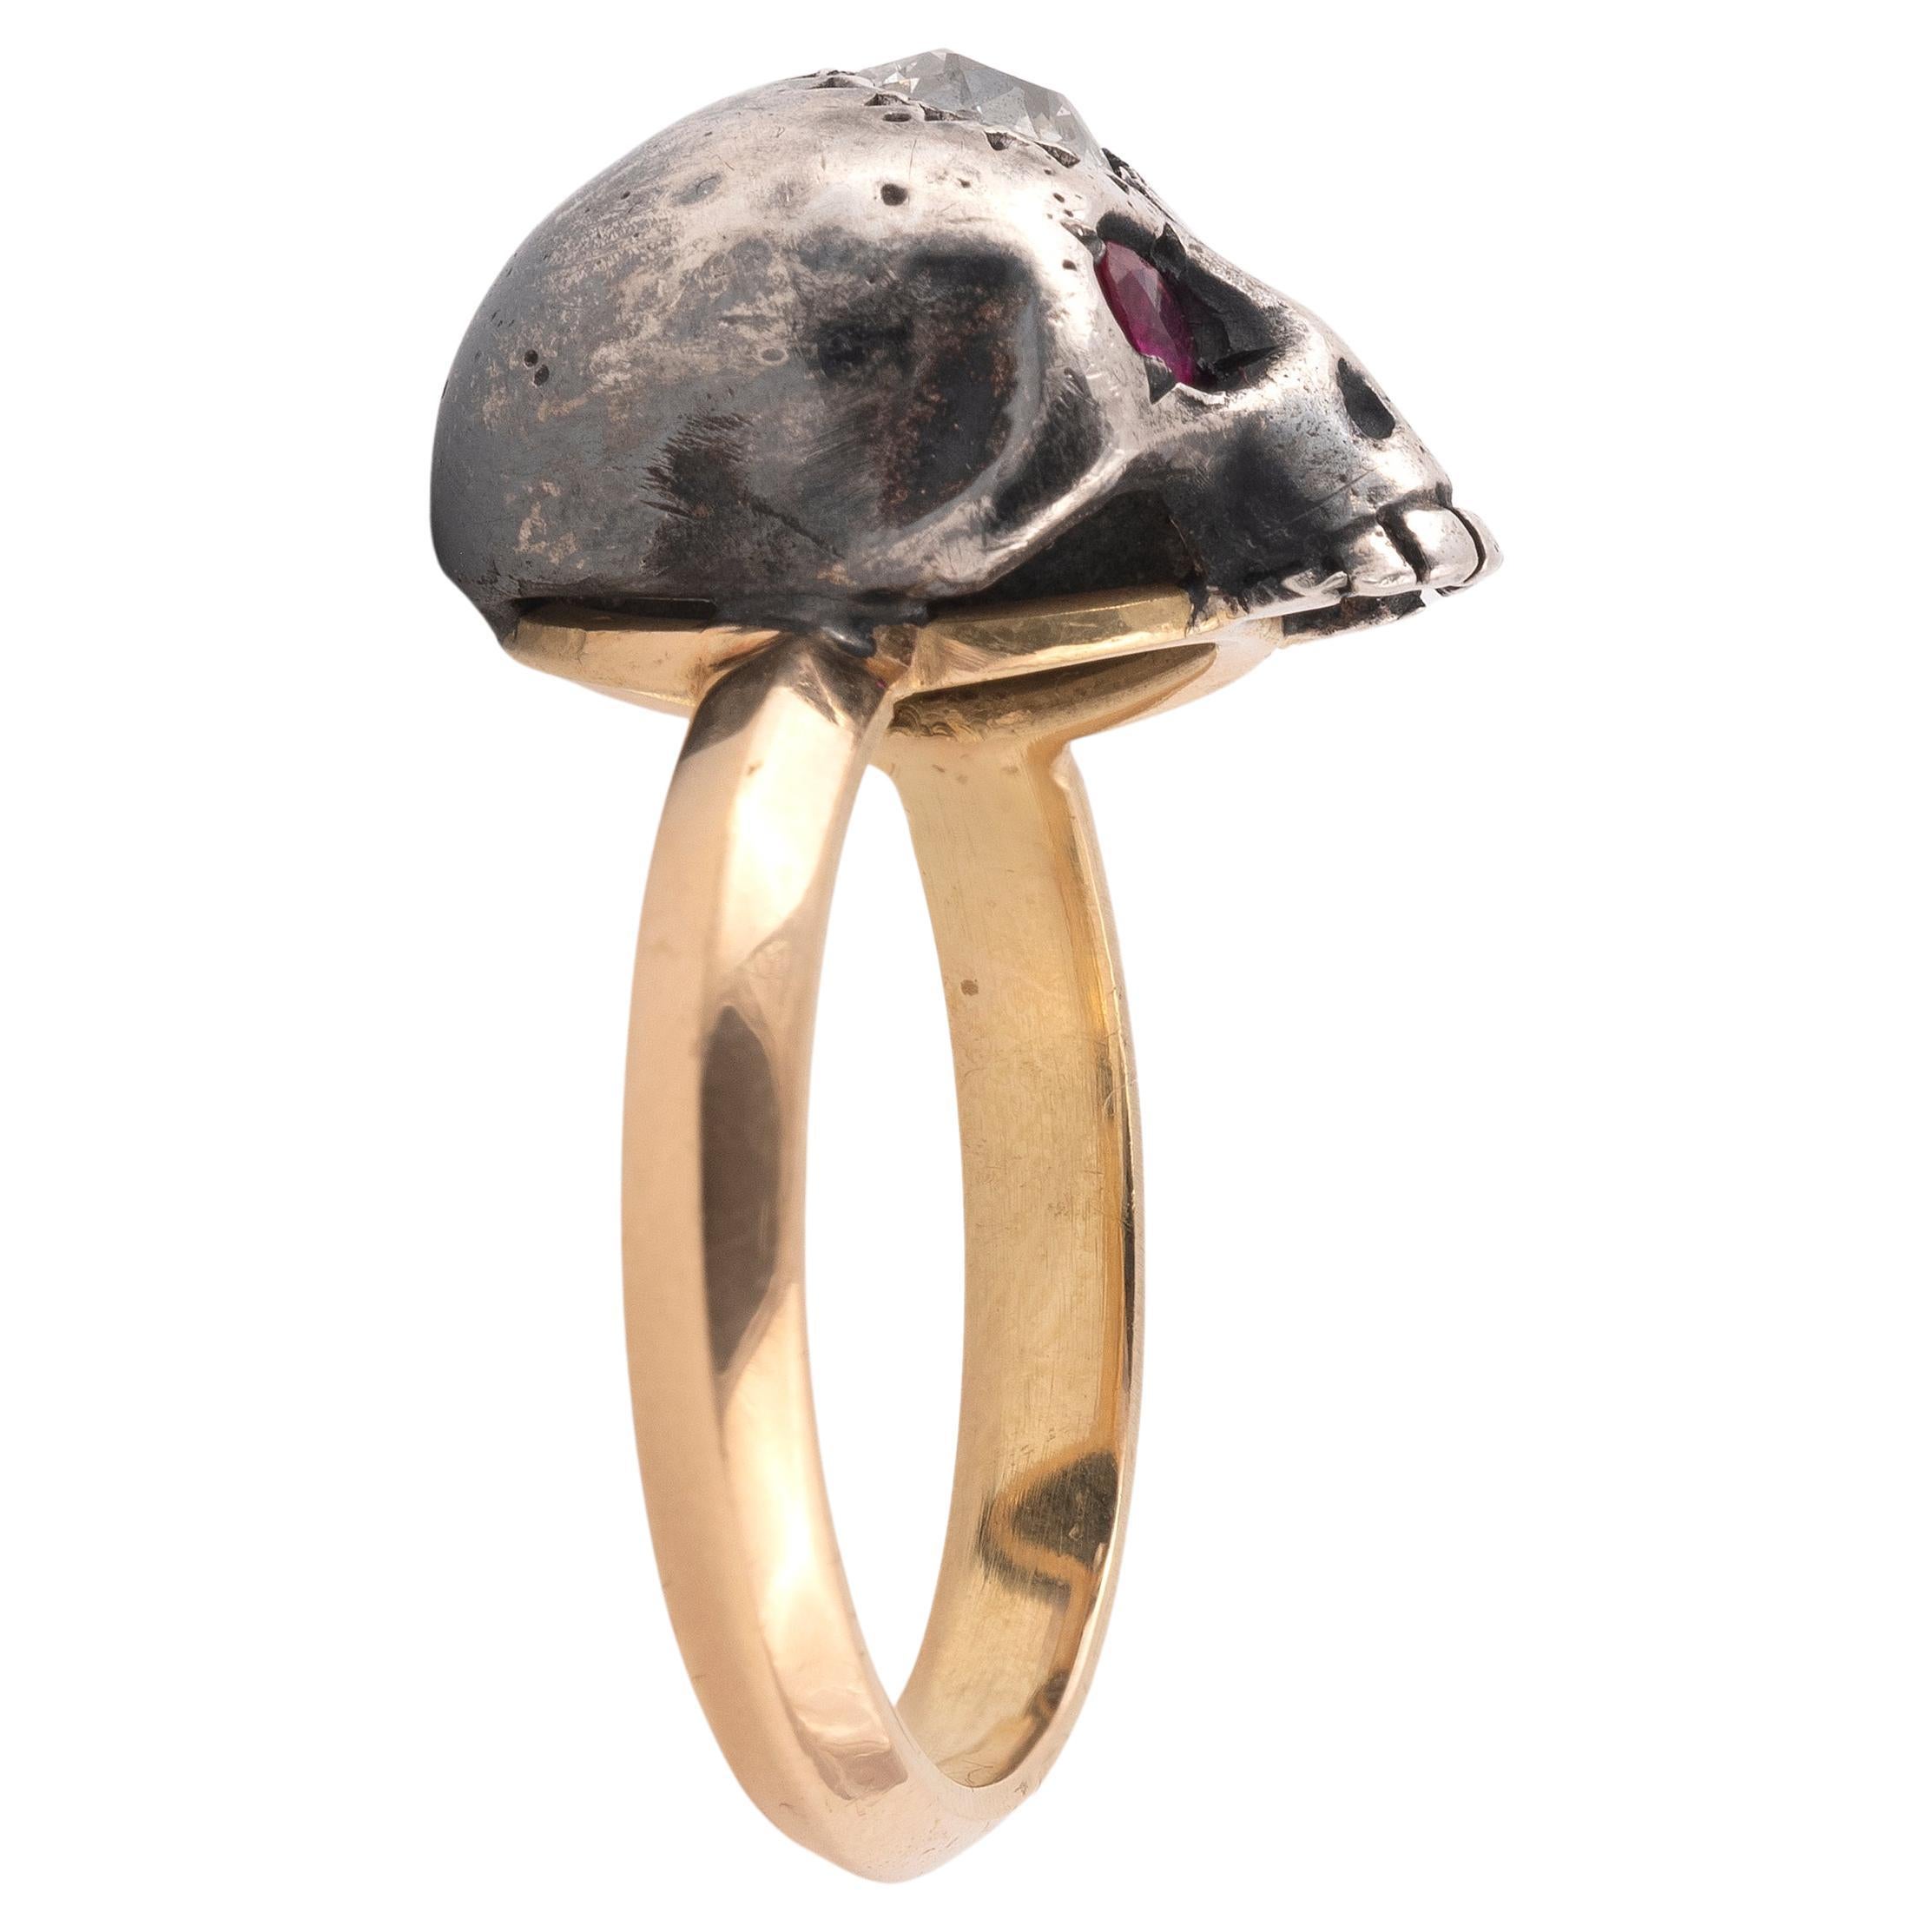 A yellow gold silver and diamond skull ring, the centre a skull with rubies eyes, split shoulders and plain designed shank, estimated total diamond weight 0.3carats, all in 18ct yellow gold.
Size 7
Weight: 6.33gr